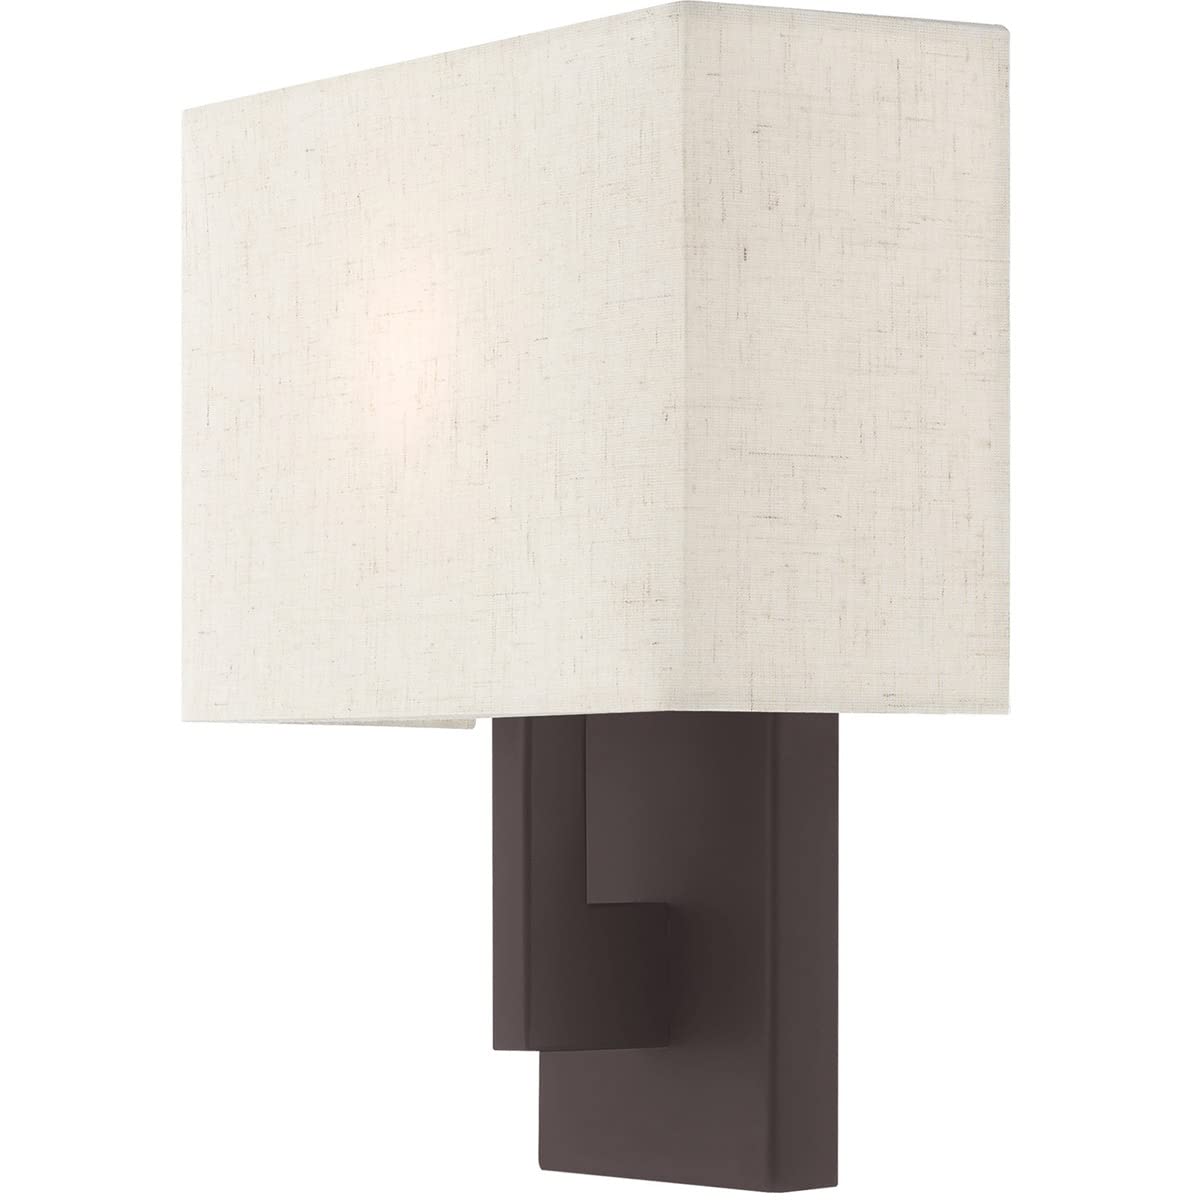 Livex Lighting 42424-07 Transitional One Light Wall Sconce from Hayworth Collection in Bronze/Dark Finish, Medium